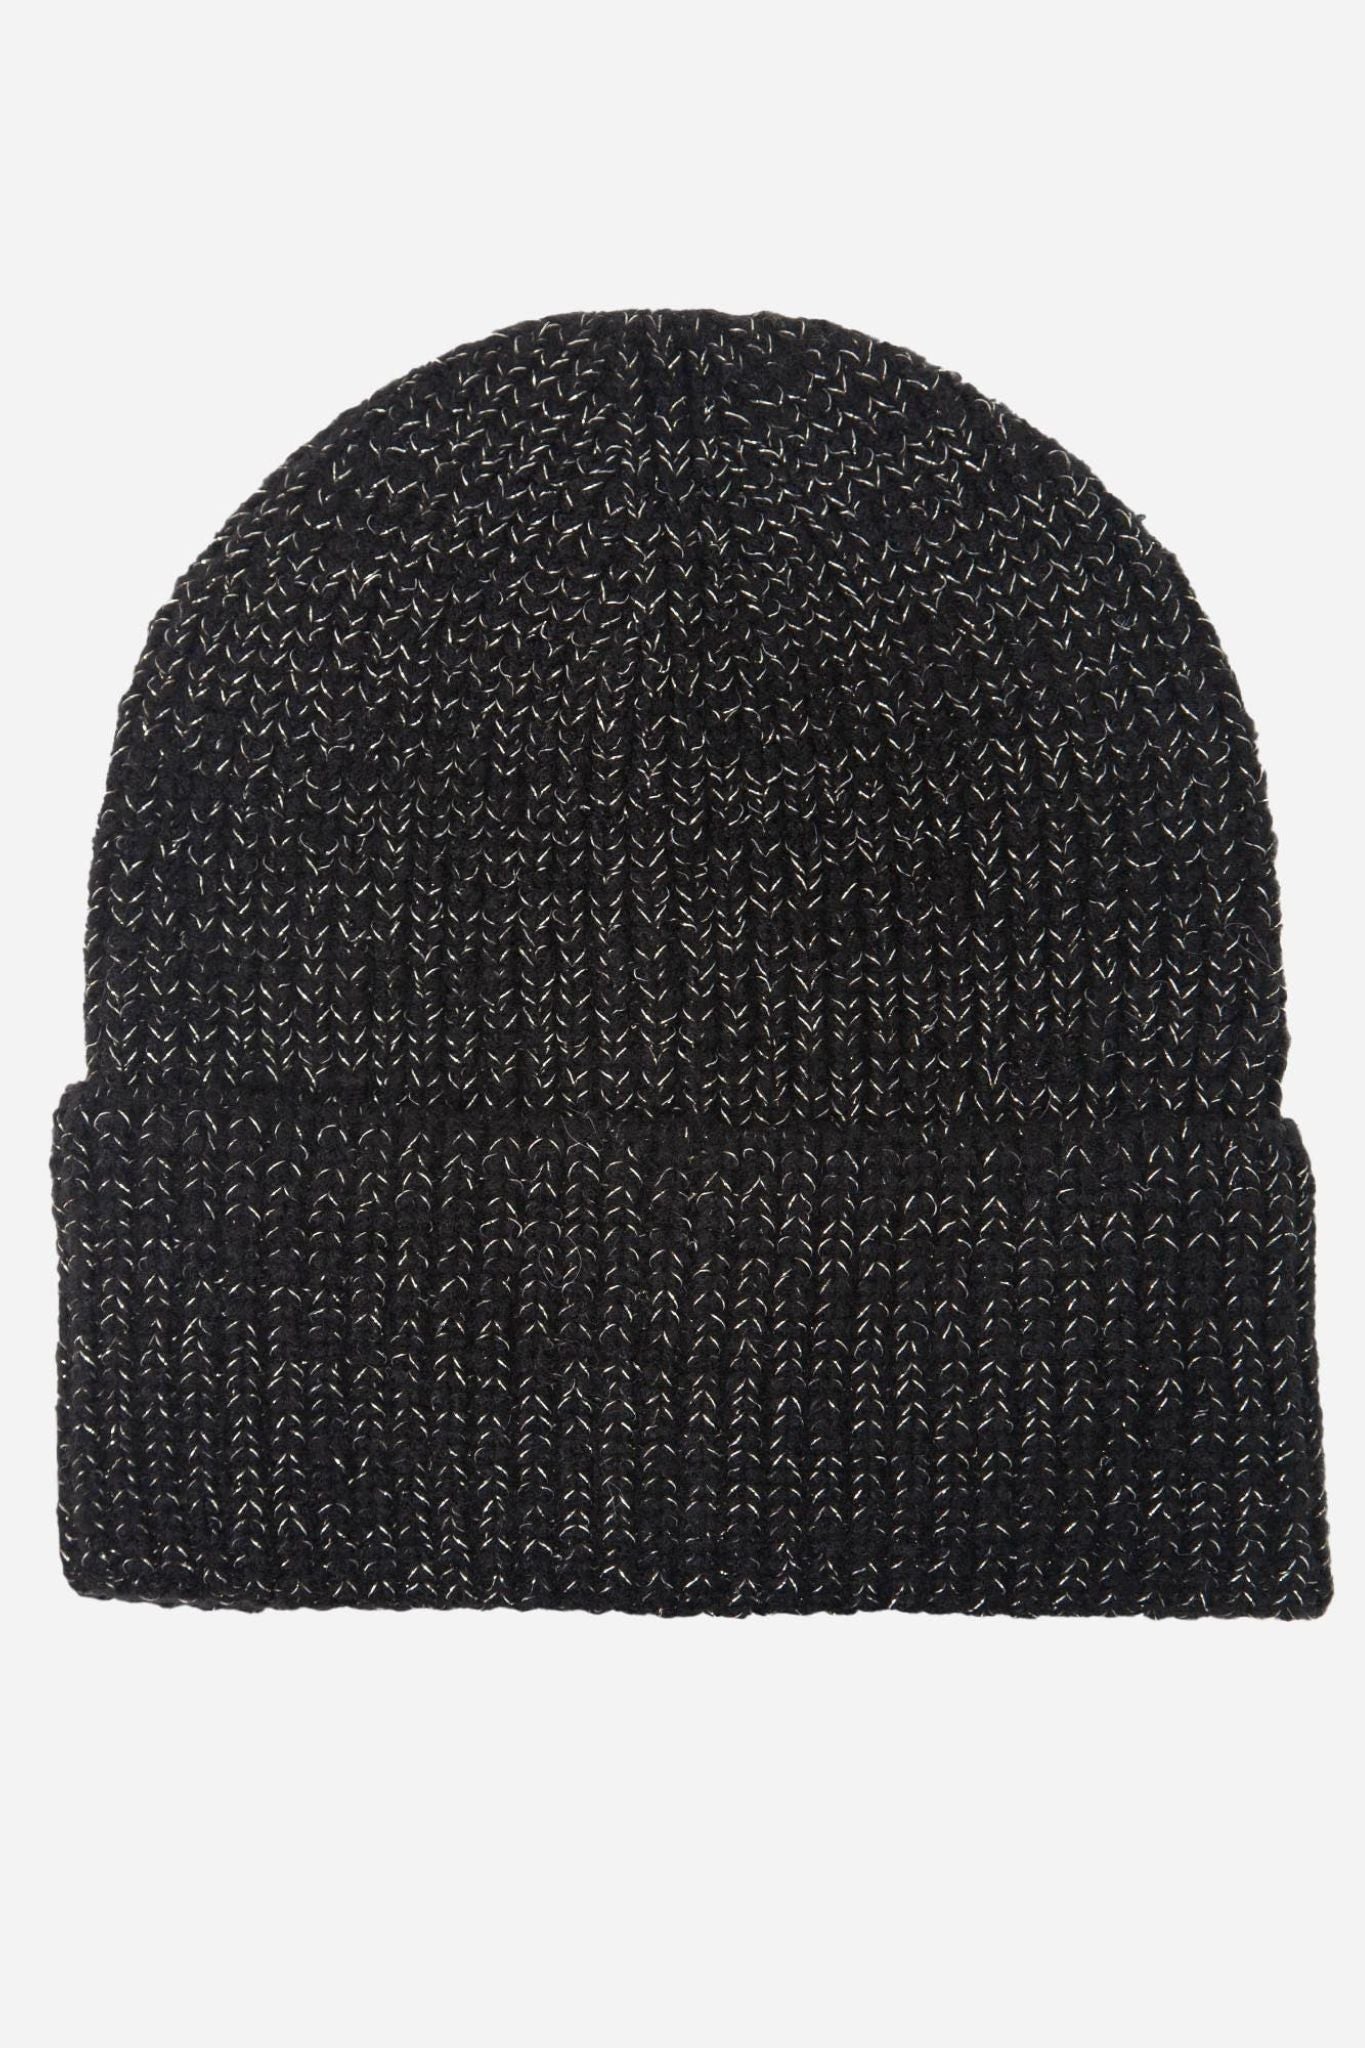 black beanie hat with metallic gold glitter thread throughout giving an all over gltiter effect